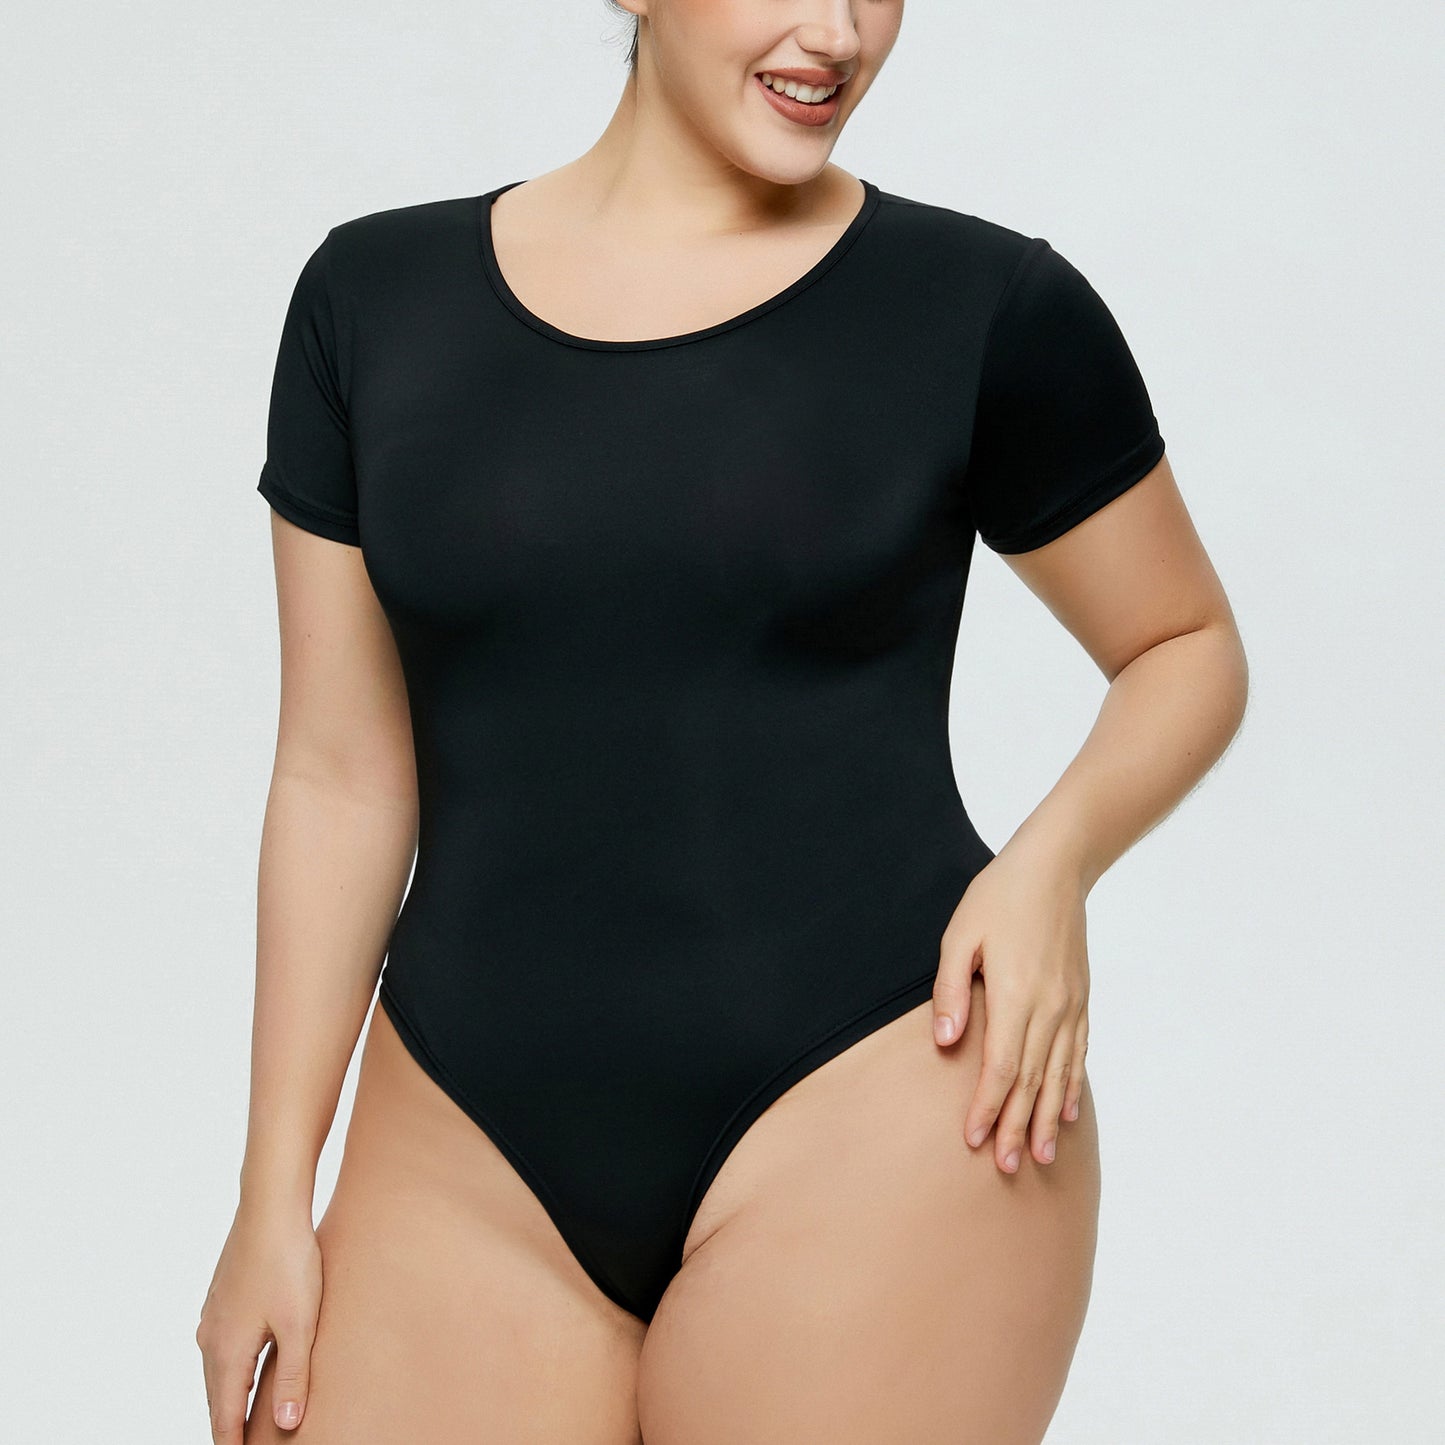 Fashion Hot Sale Plus Size Women's Bodysuit All-match Bottoming Round Neck Short-sleeved One-piece Briefs 5 Colors